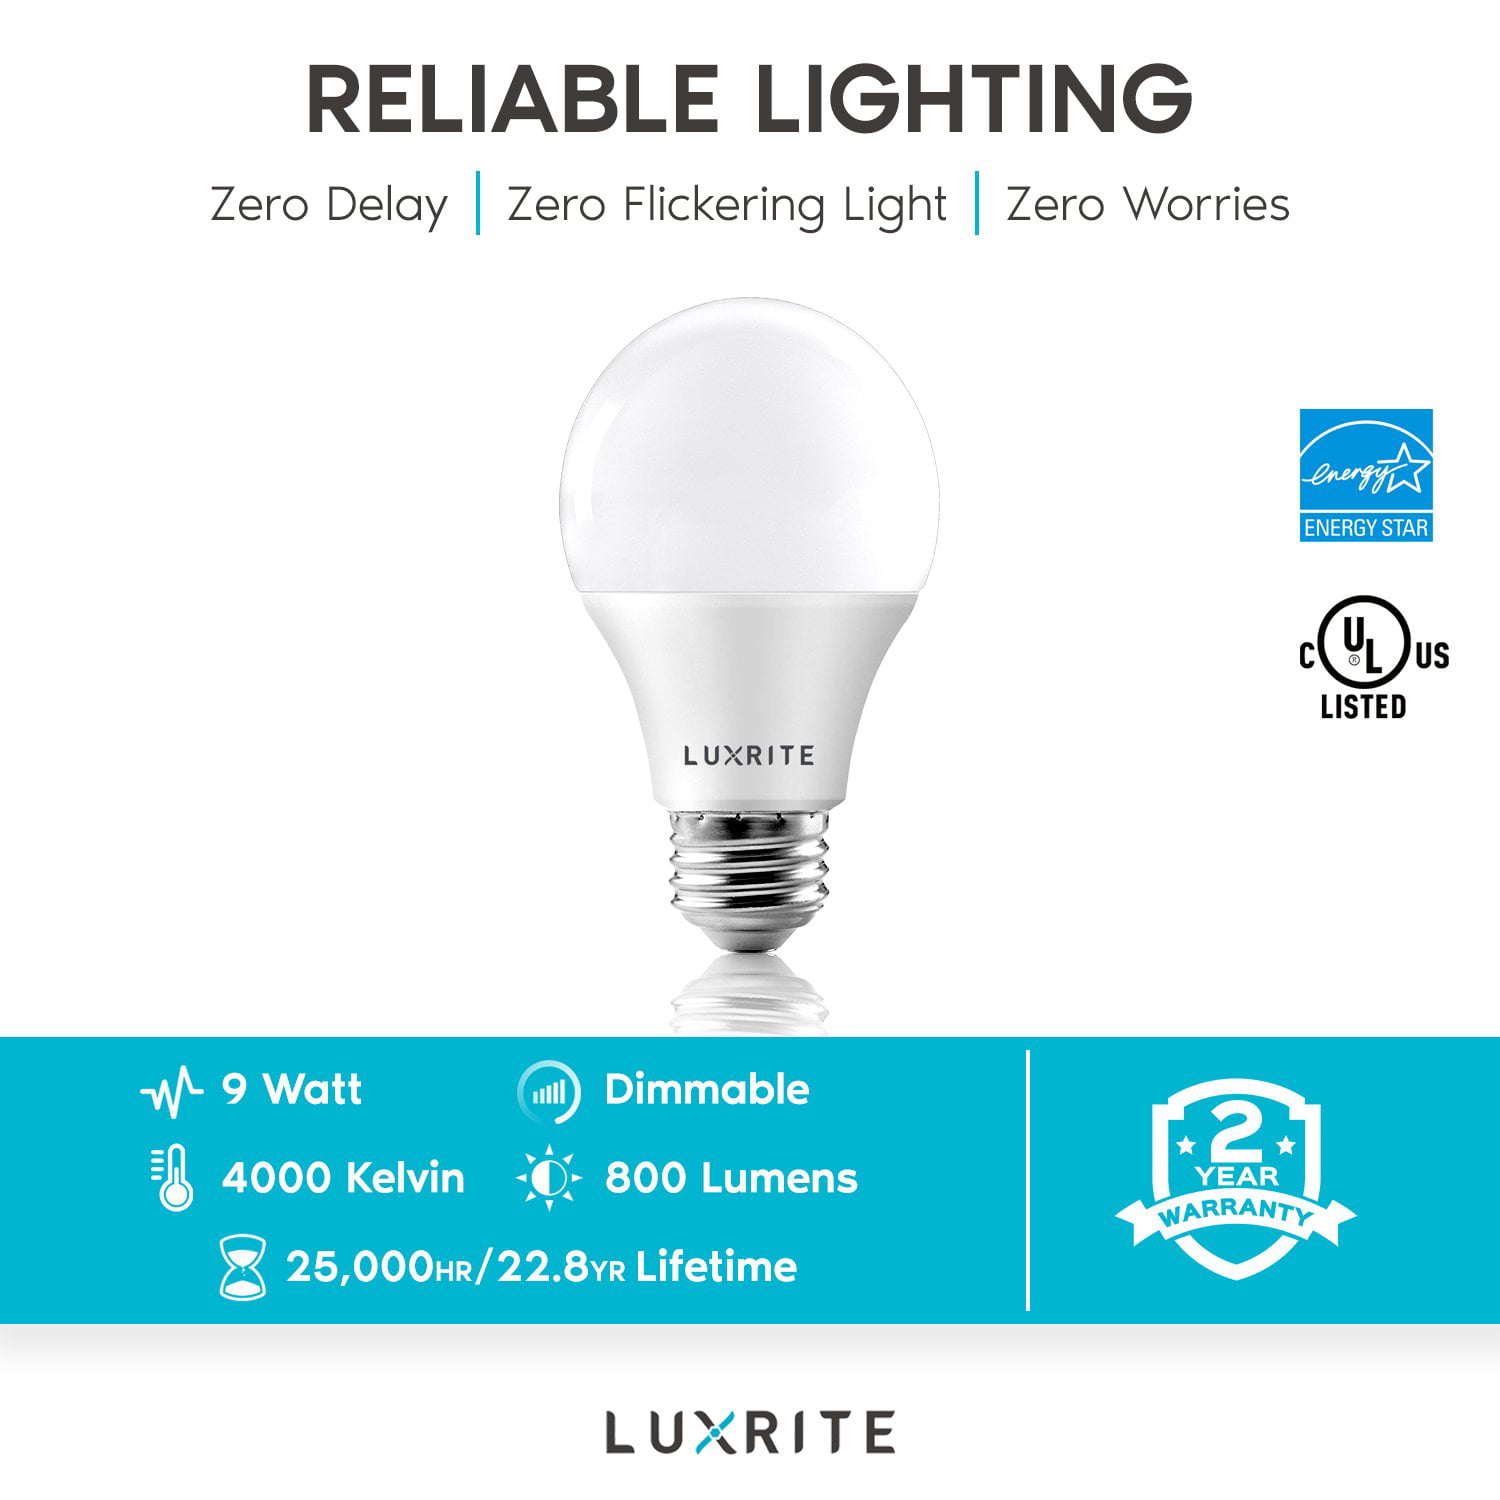 Perfect for Lamps and Home Lighting Standard LED Bulb 9W Energy Star Luxrite A19 LED Light Bulb 60W Equivalent Enclosed Fixture Rated 3000K Warm White Dimmable E26 Base 4 Pack 800 Lumens 